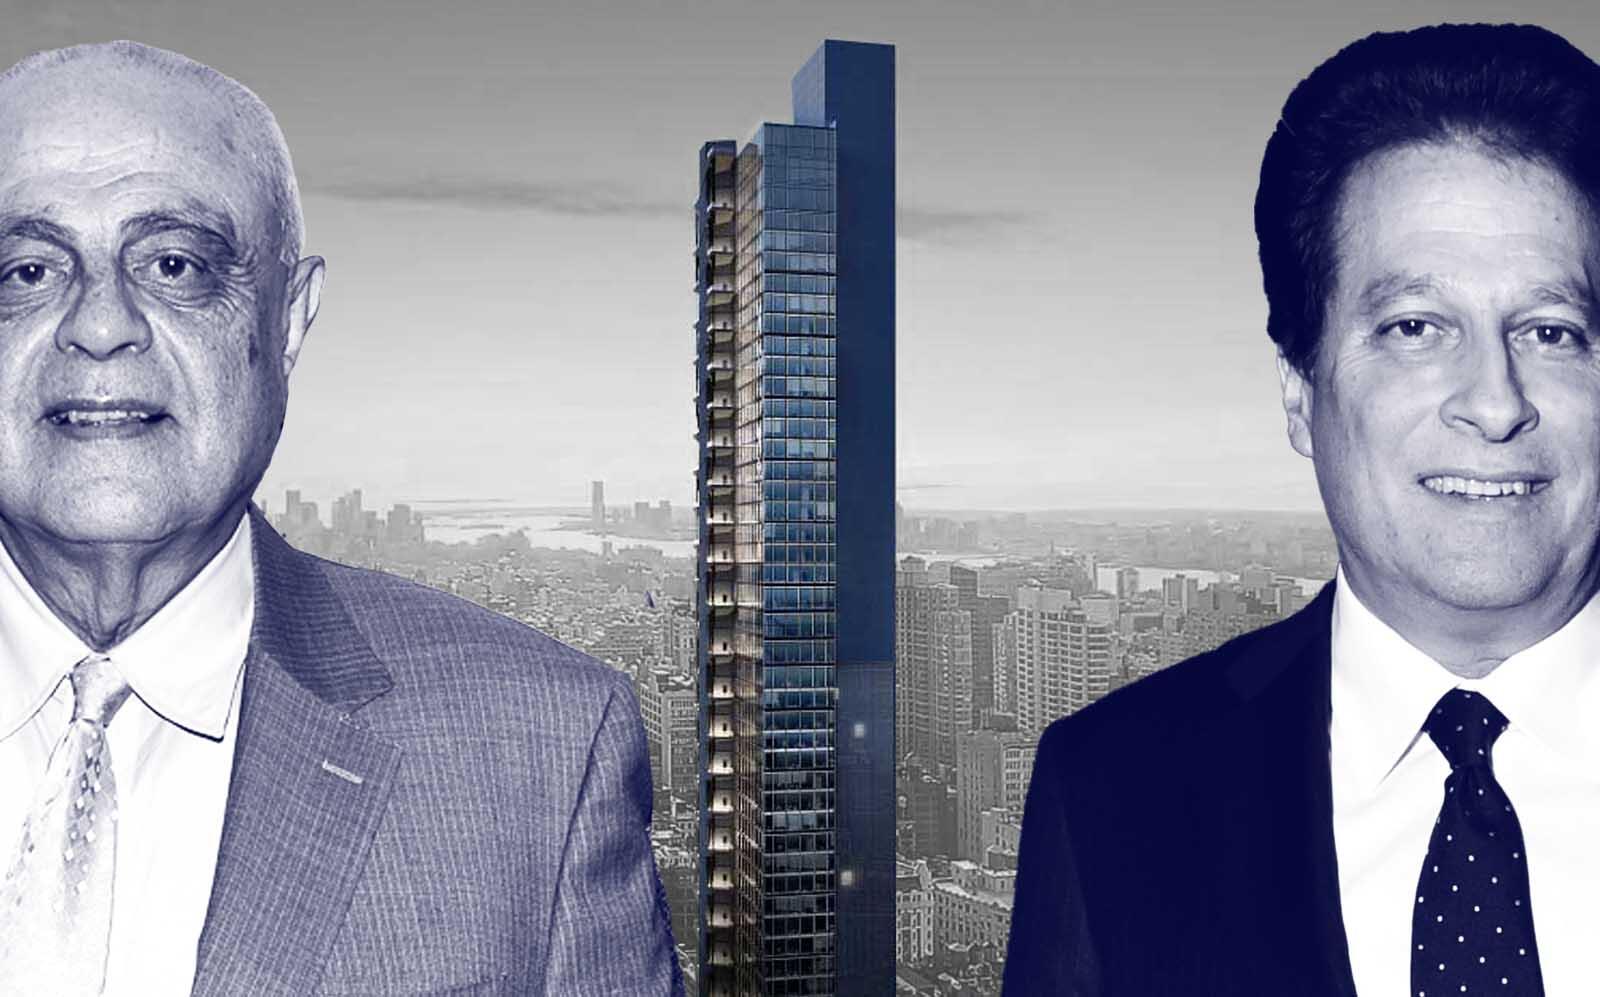 Suit alleges investor Kamran Hakim, at left, planned to inject $40 million to help save 29th and Fifth tower project. At right, HFZ's Ziel Feldman. (Getty, HFZ)